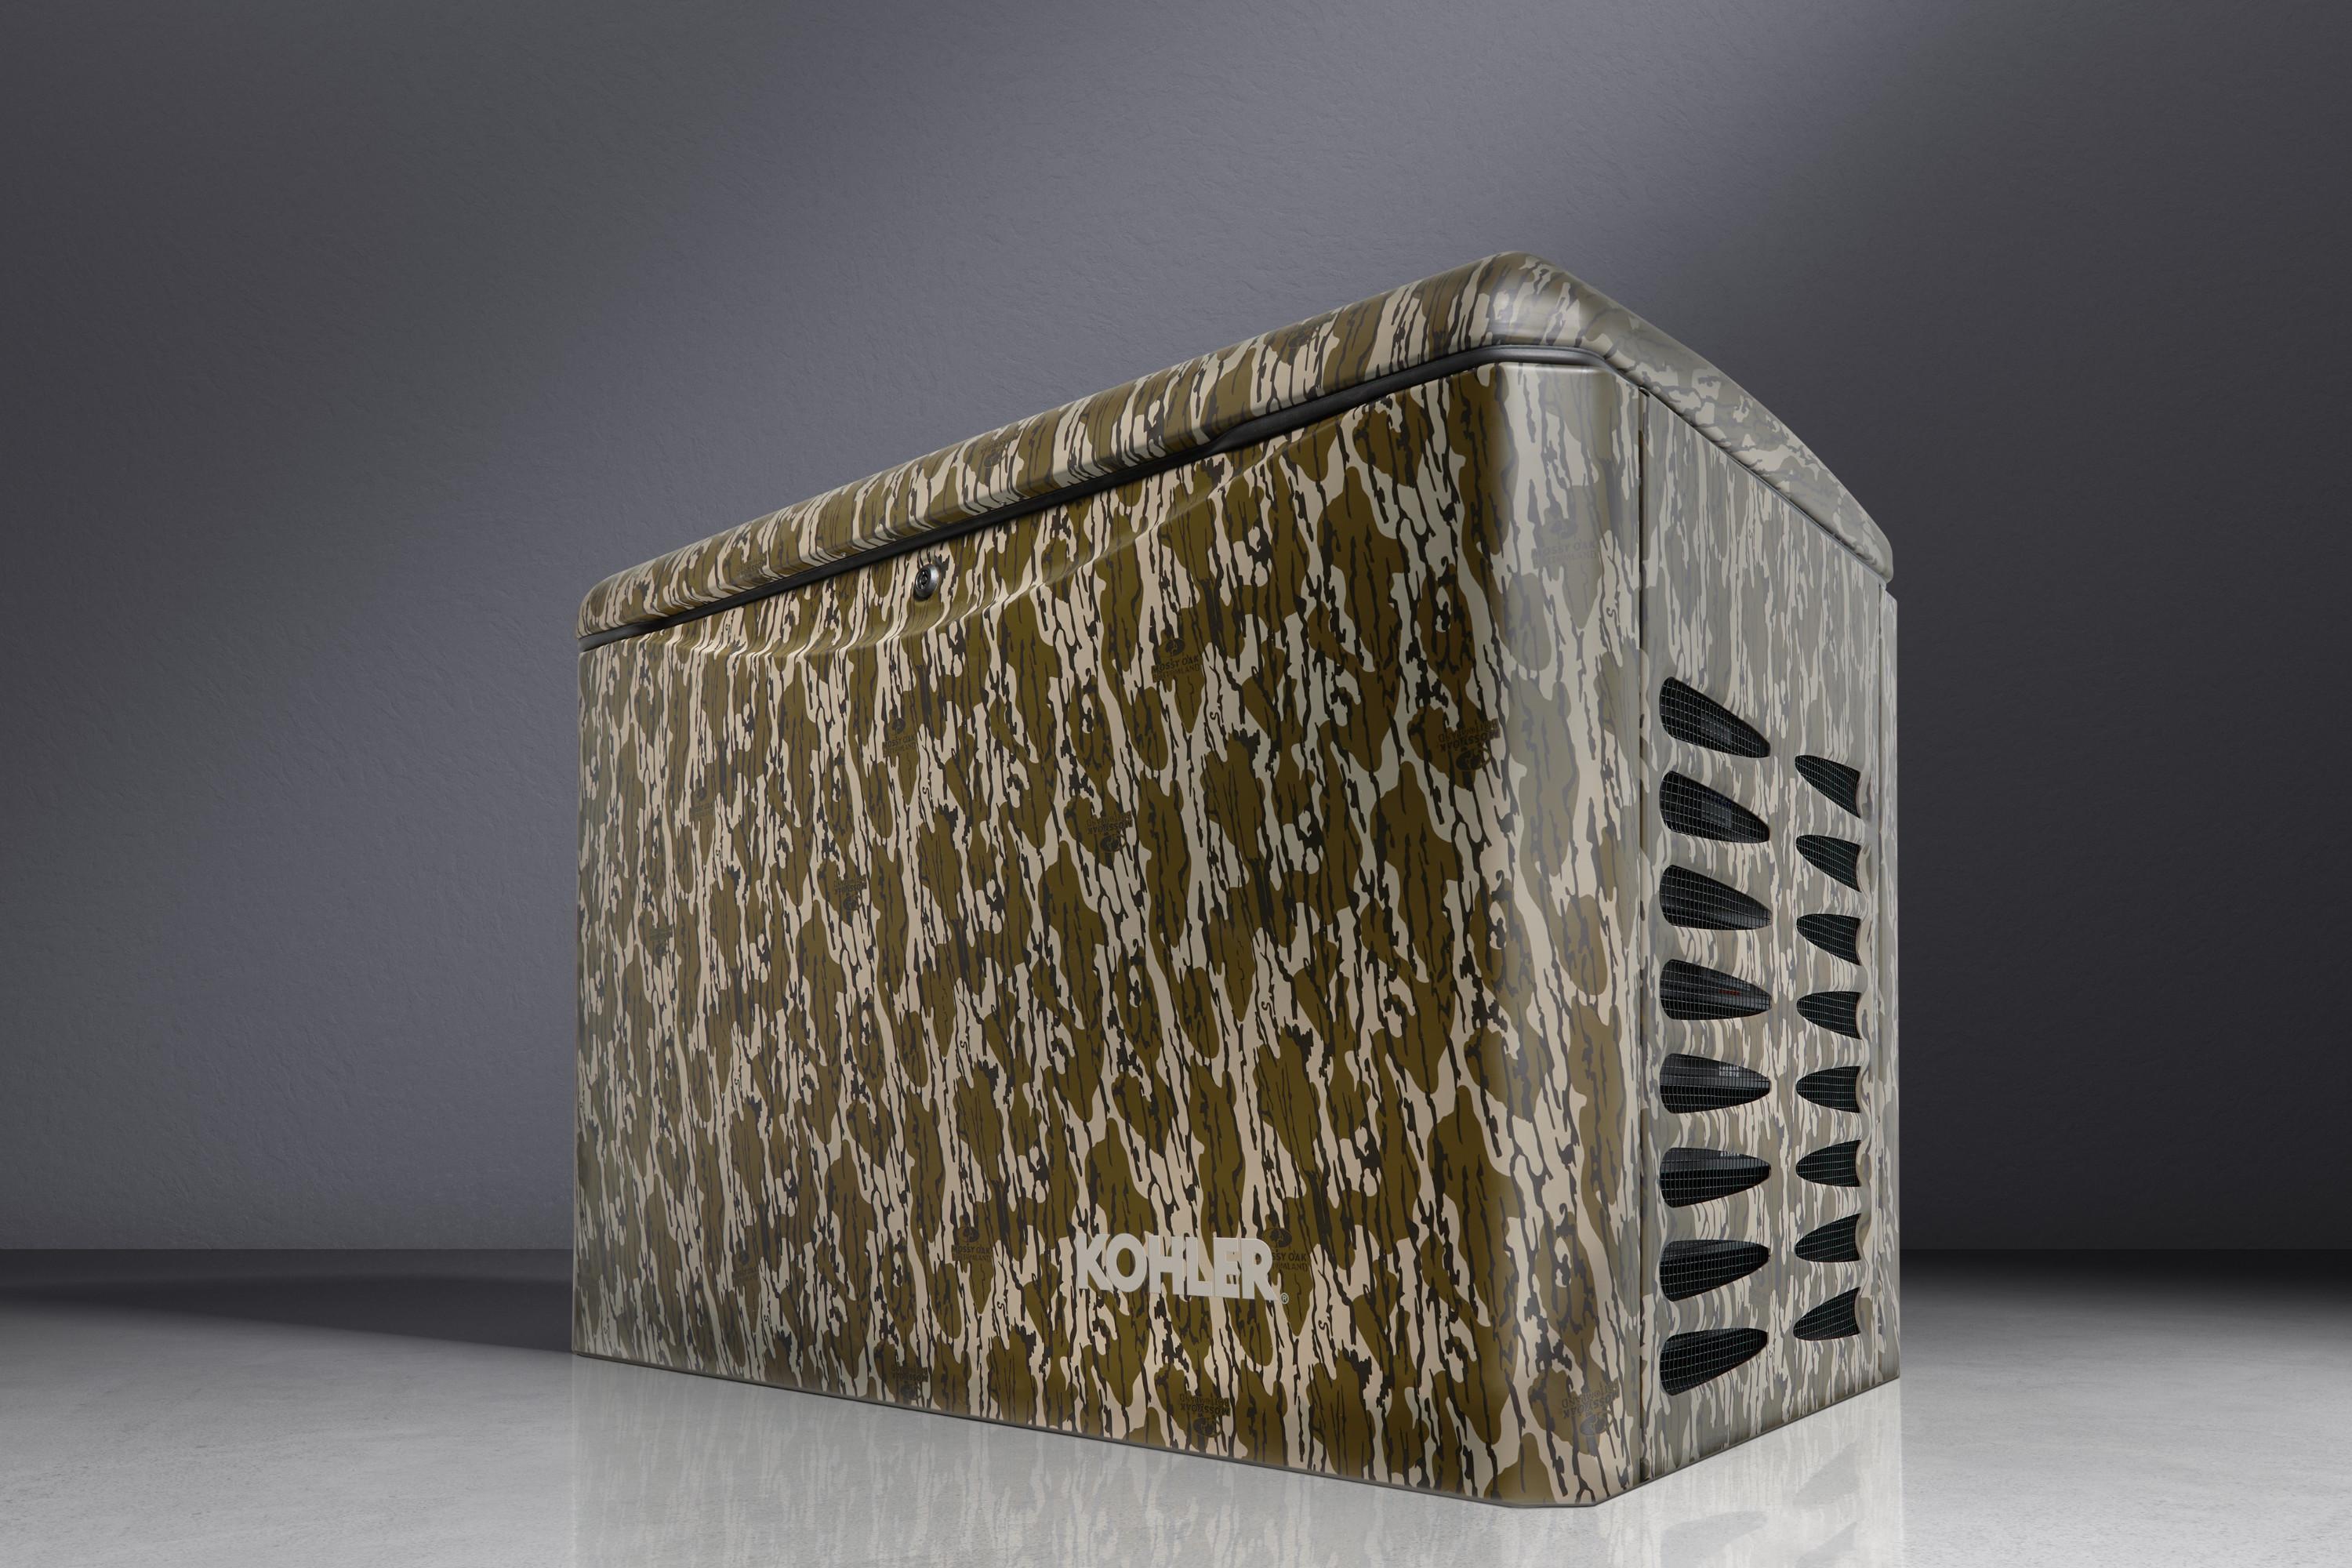 A camouflage-wrapped home generator in an empty room with gray walls.